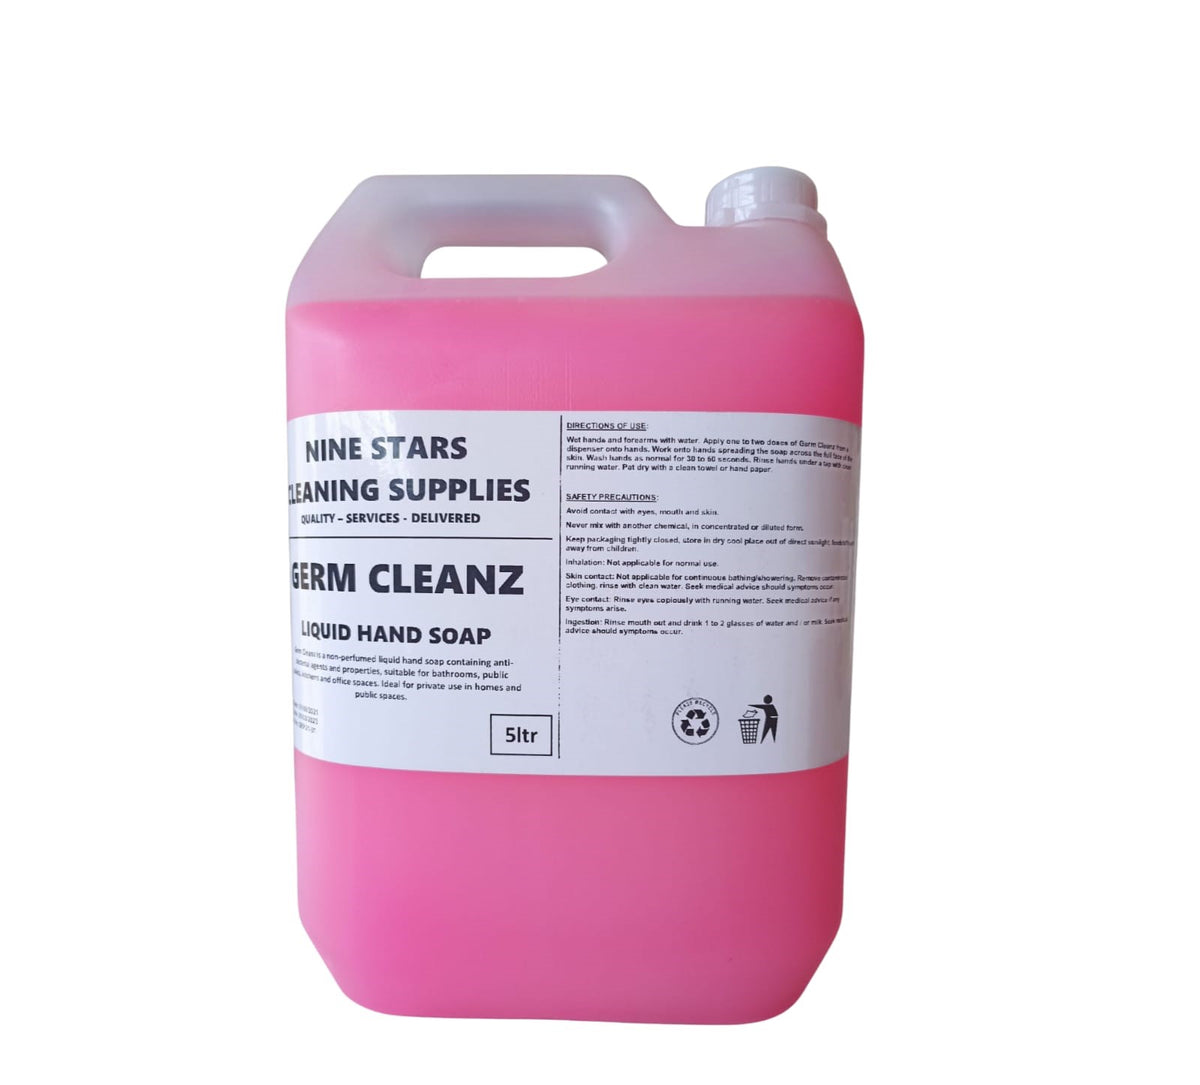 Germ Cleanz - Pink Hand Soap - 5 Litre – Nine Stars Cleaning Supplies